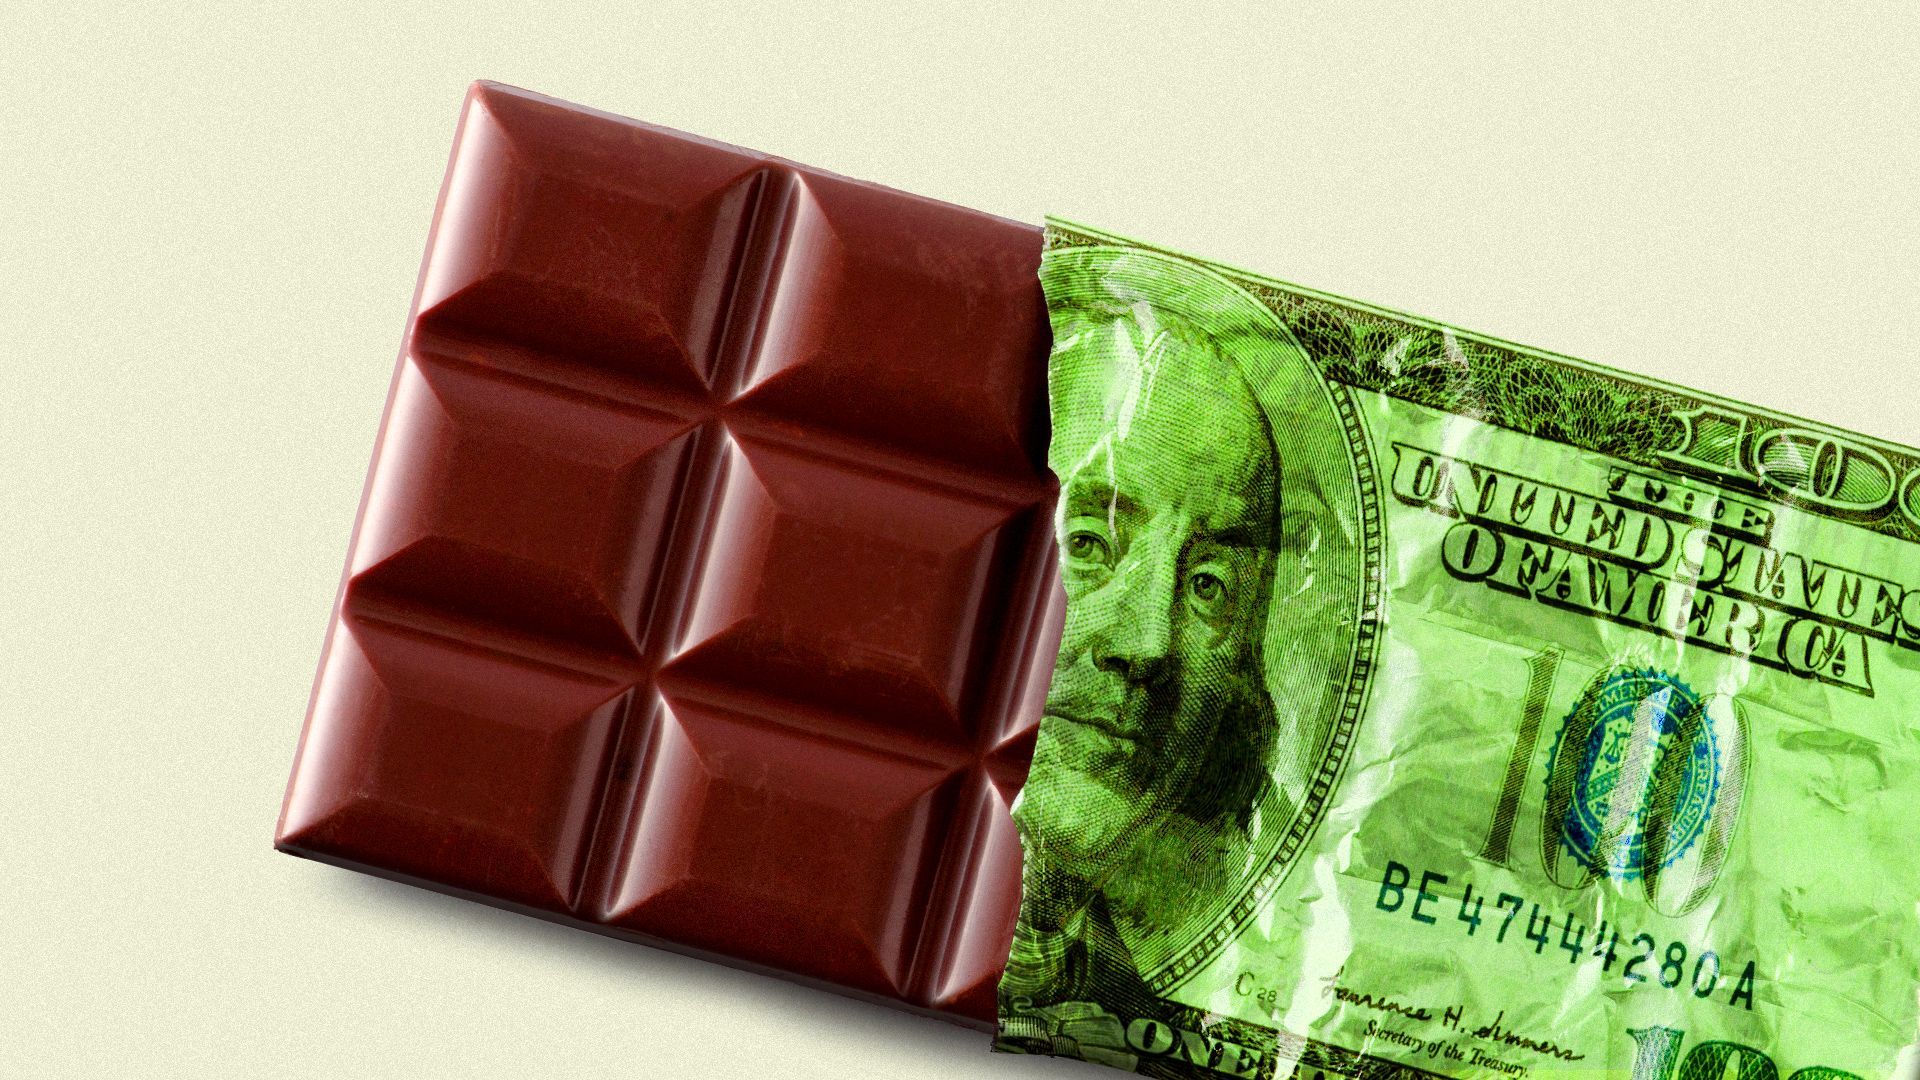 Illustration of a chocolate bar wrapped in a one hundred dollar bill.